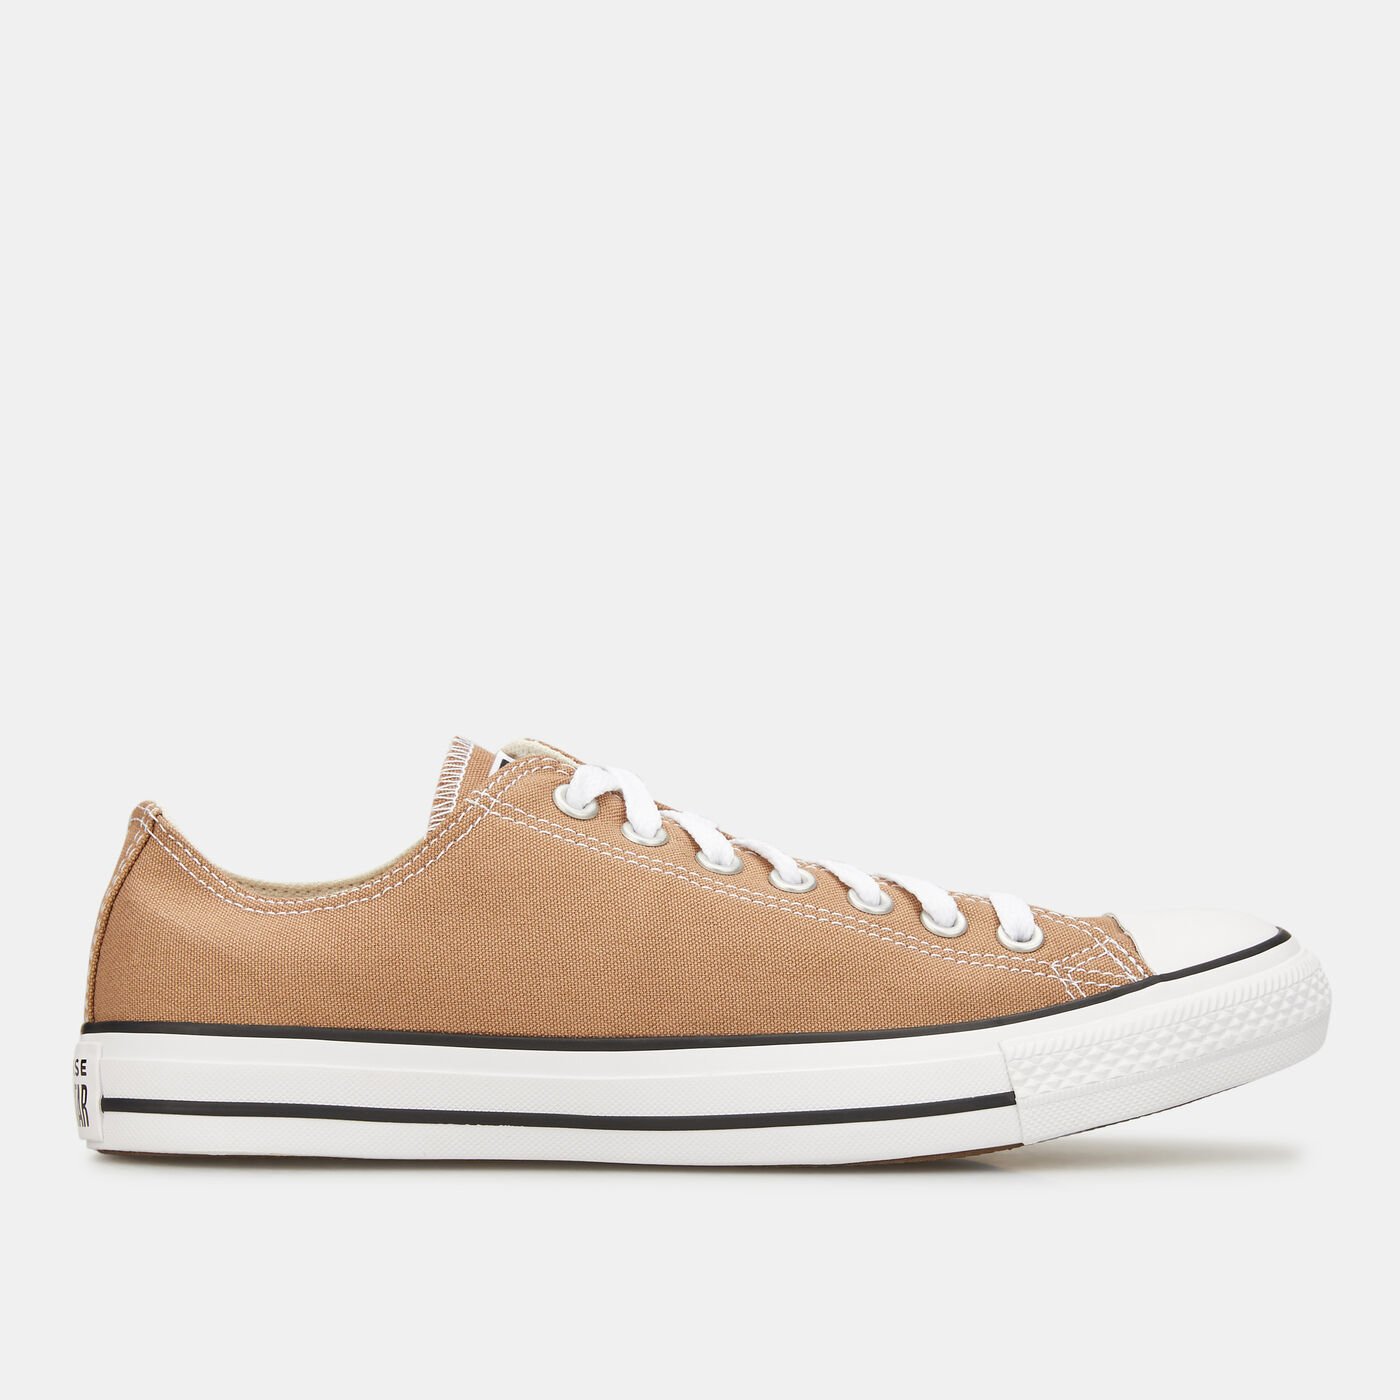 Chuck Taylor All Star Low Unisex Shoes